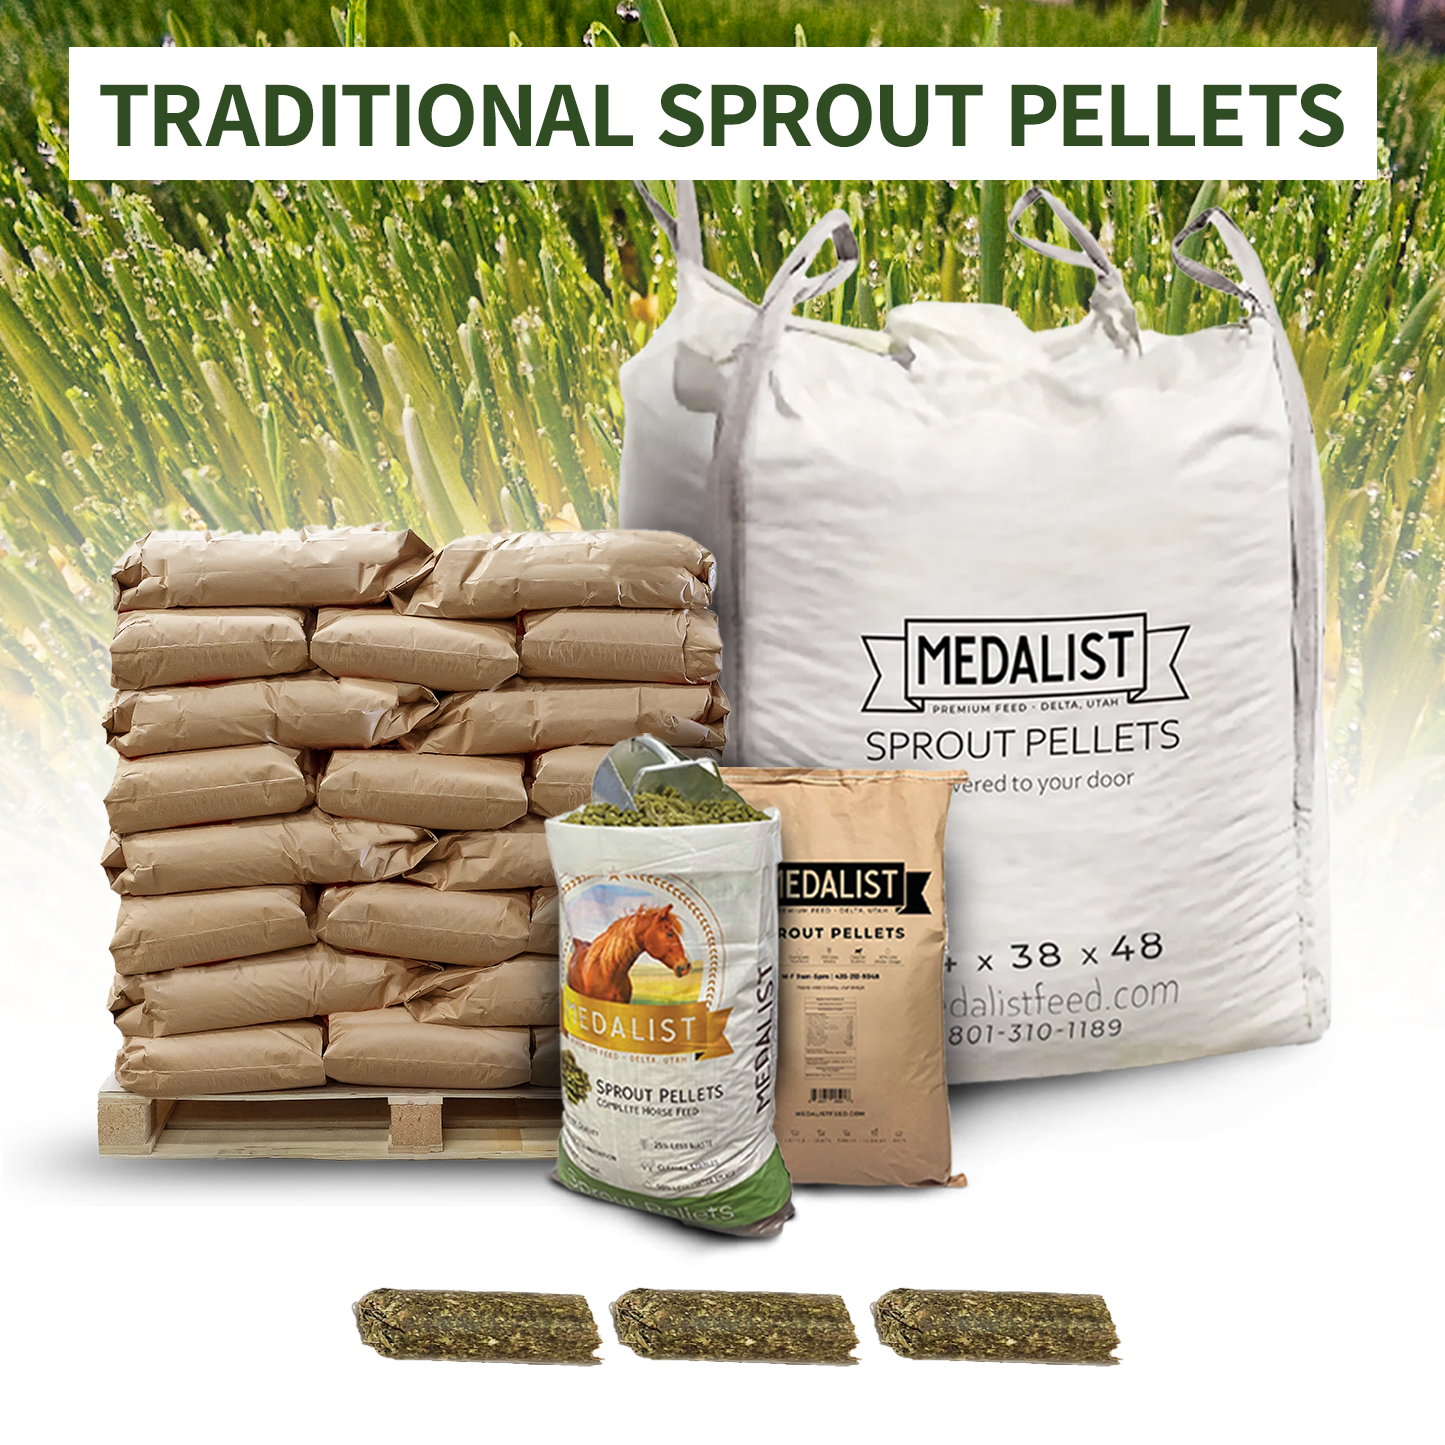 Medalist sprout pellets all sizes